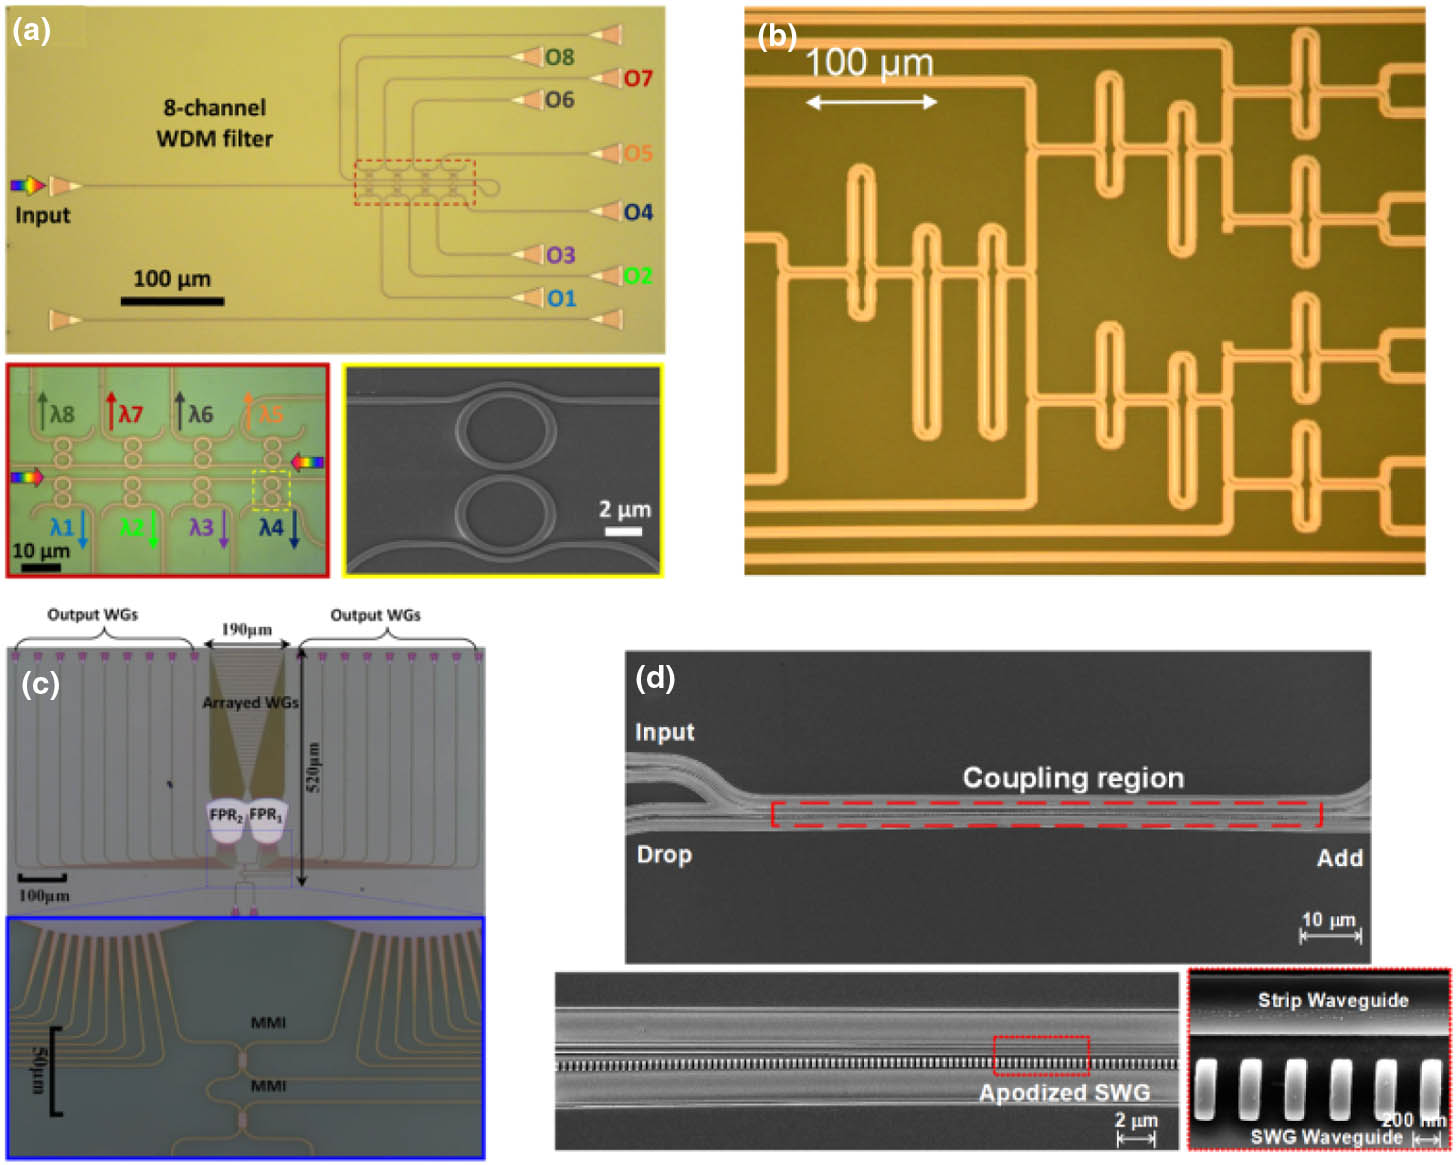 (a) Optical microscope and scanning electron microscope (SEM) photos of an eight-channel add-drop filter based on second-adiabatic elliptical-MRRs [18]; (b) micrograph of a cascaded MZI (de)multiplexer [20]; (c) optical micrographs of a bidirectional AWG and an MZI-based interleaver [4]; (d) SEM photos of a contradirectional coupler based on an apodized SWG [21].